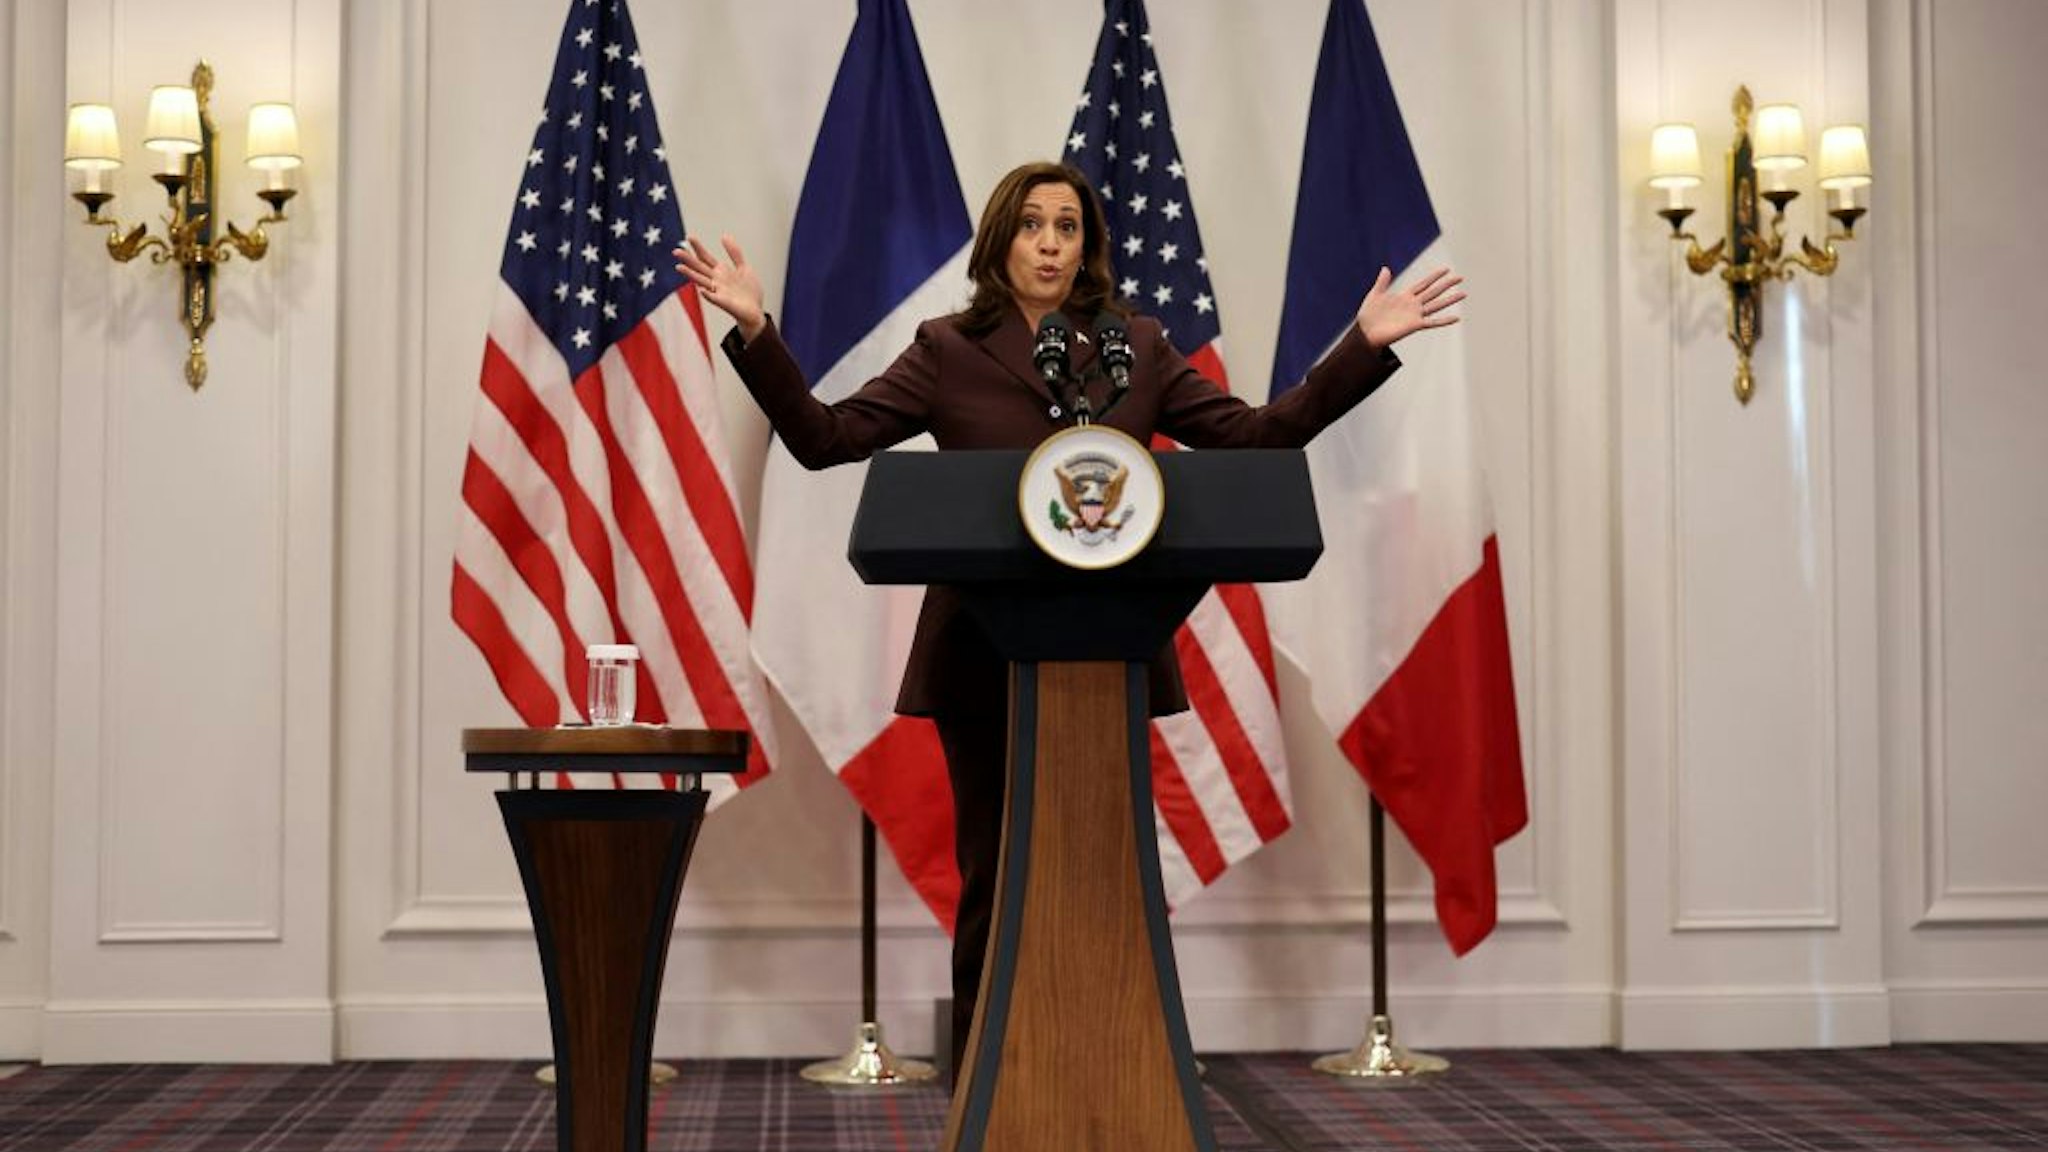 US Vice-President Kamala Harris gives a press conference in Paris on November 12, 2021. (Photo by Thomas COEX / POOL / AFP) (Photo by